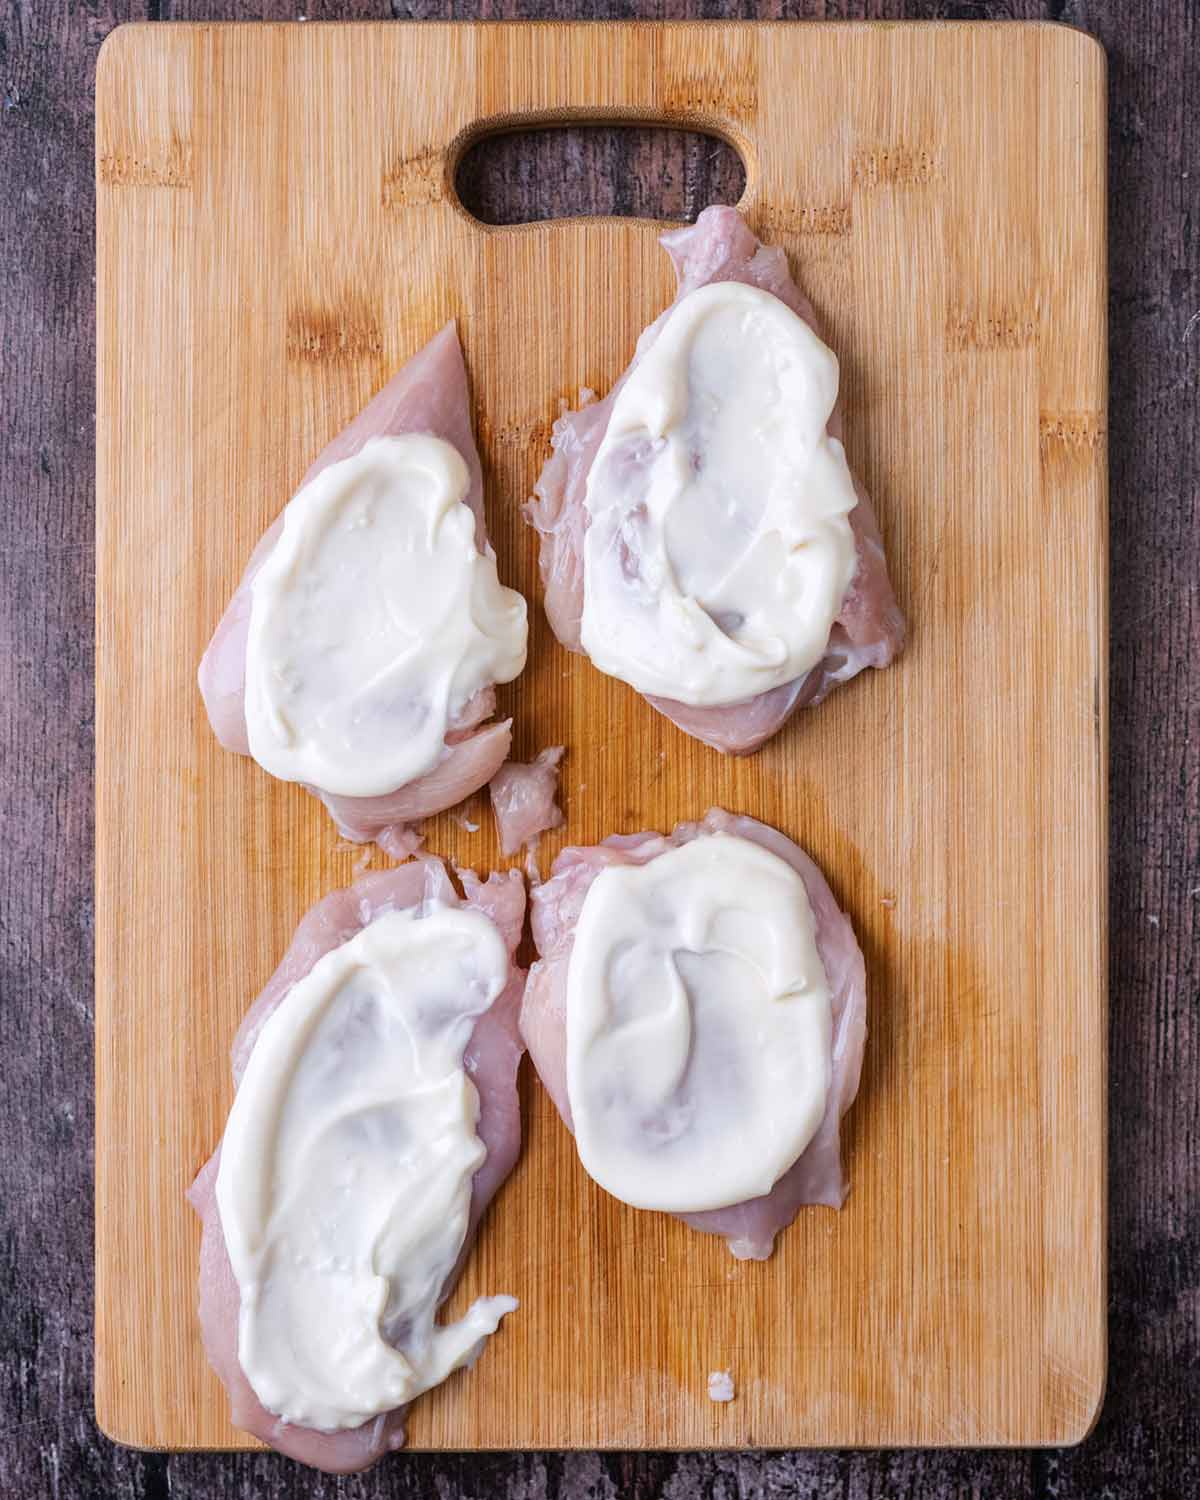 Four chicken breasts with mayonnaise spread over them.